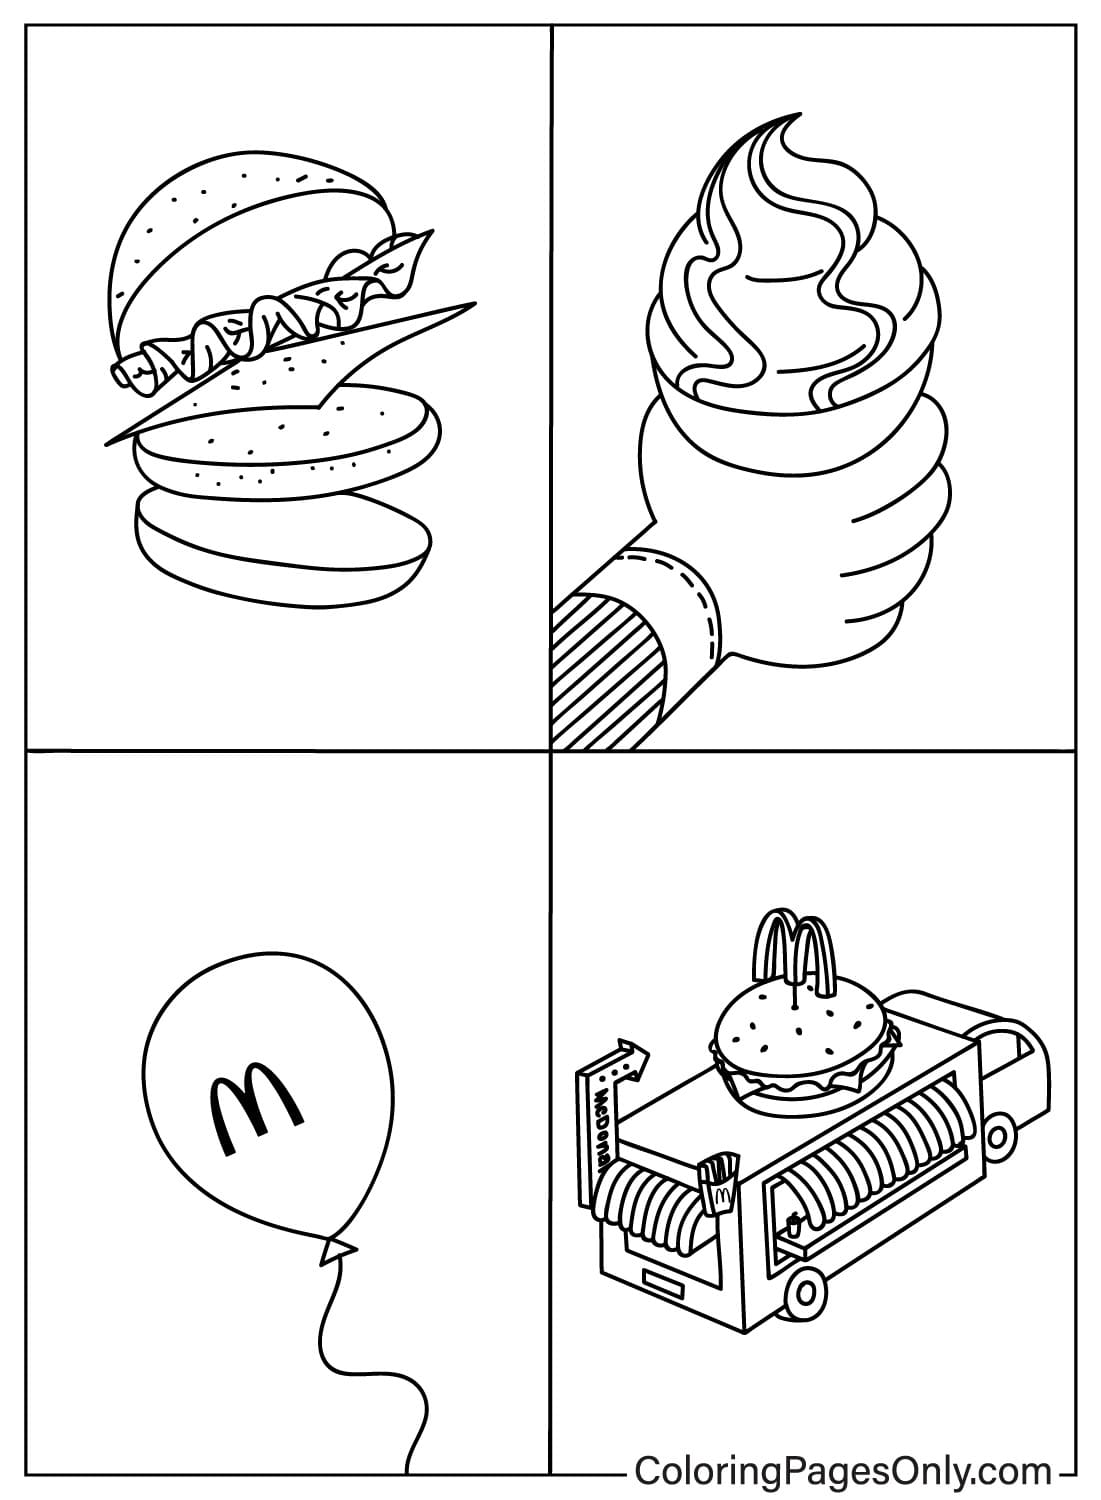 McDonalds Coloring Page to Printable from McDonald's